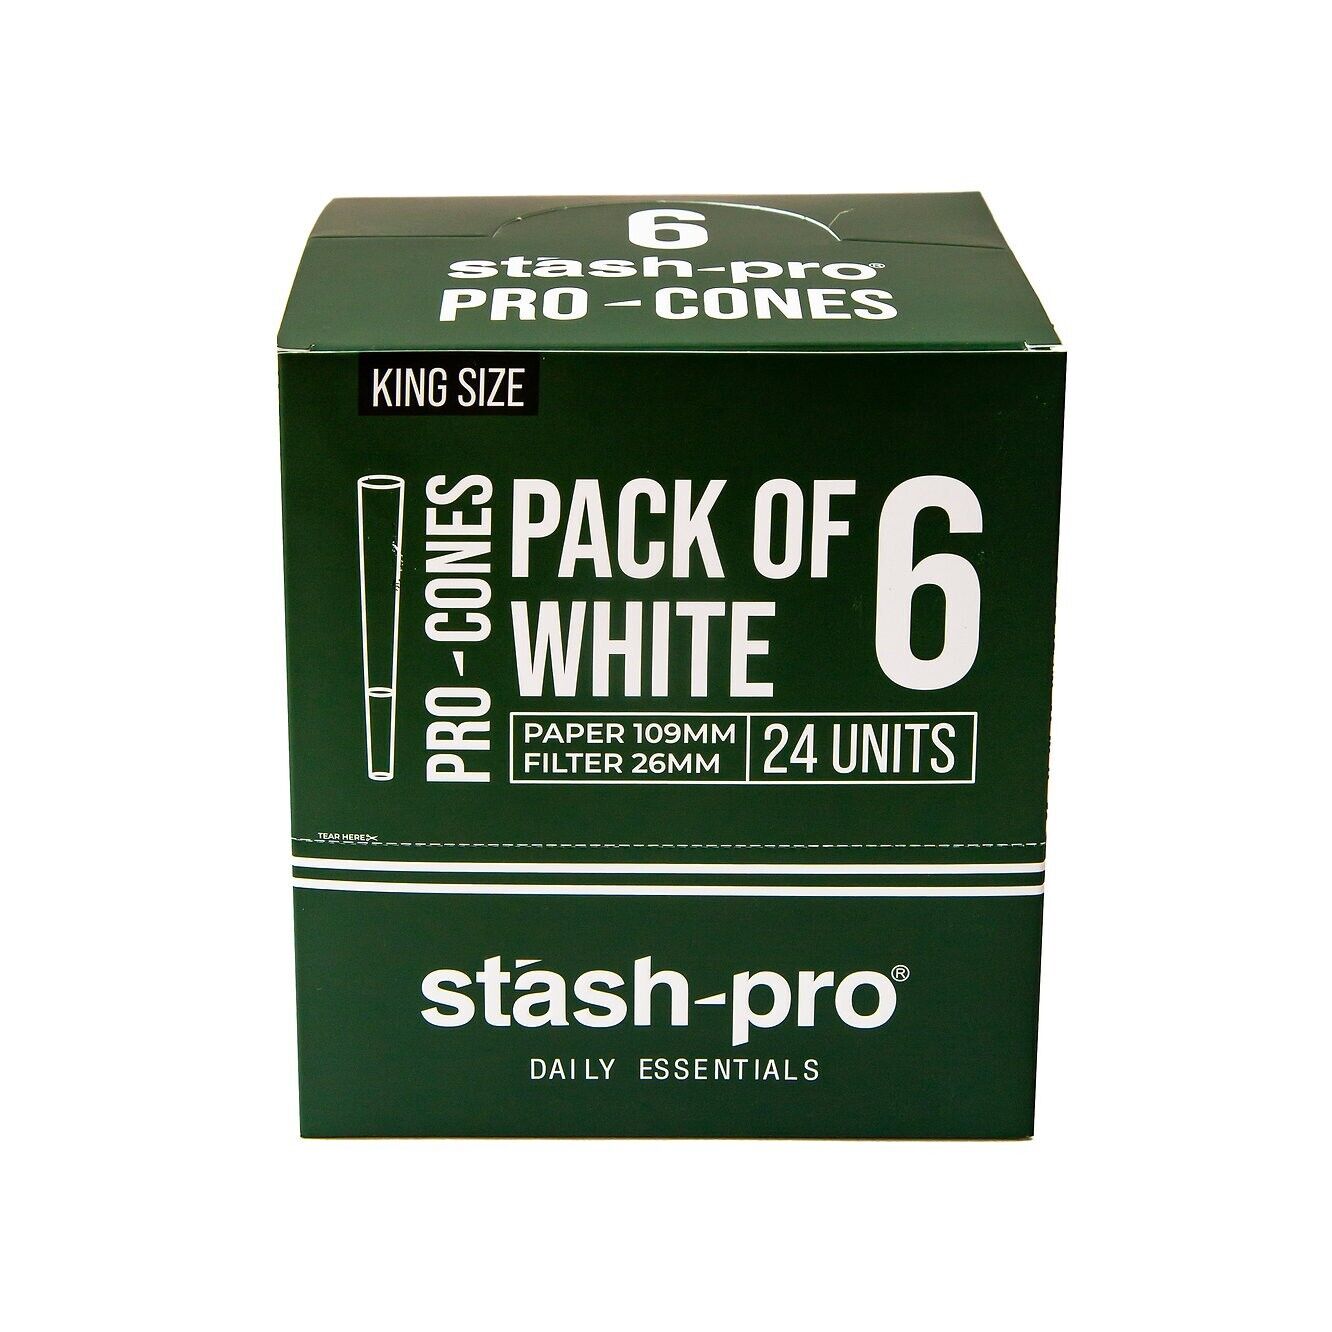 Stash Pro Classic King Size Pre-Rolled Cones 144 Pack